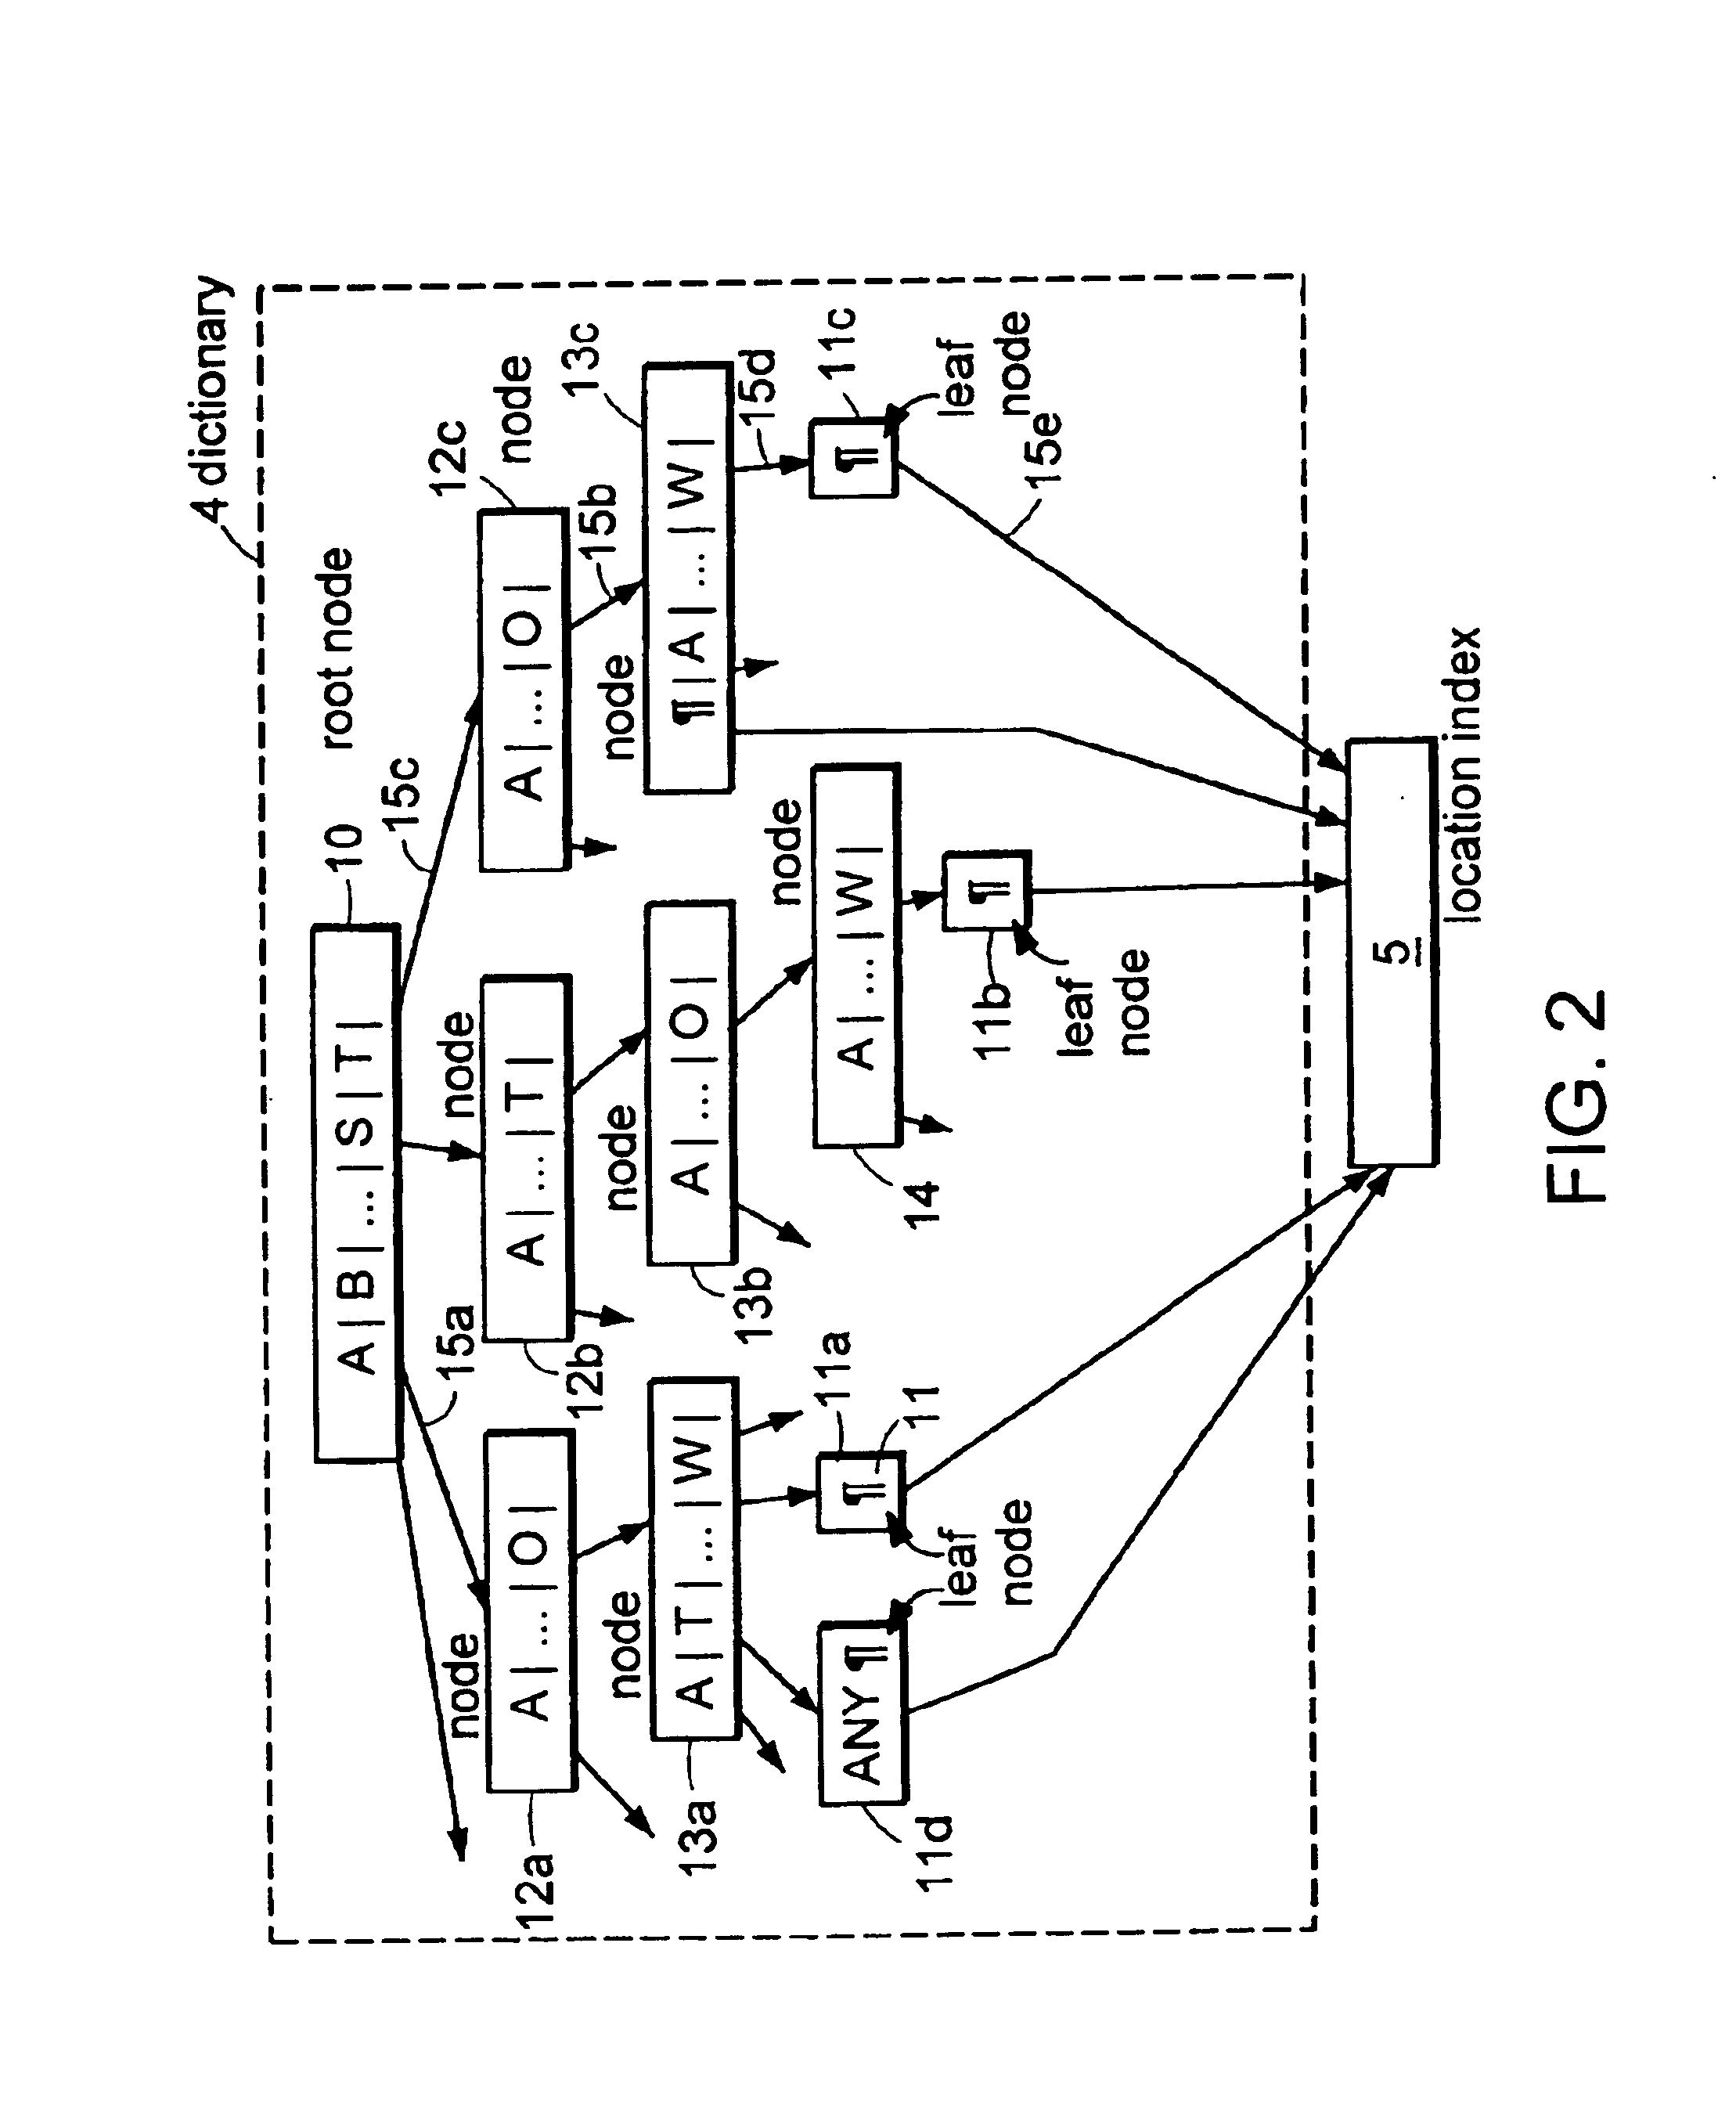 Method and apparatus for retrieving data representing a postal address from a plurality of postal addresses